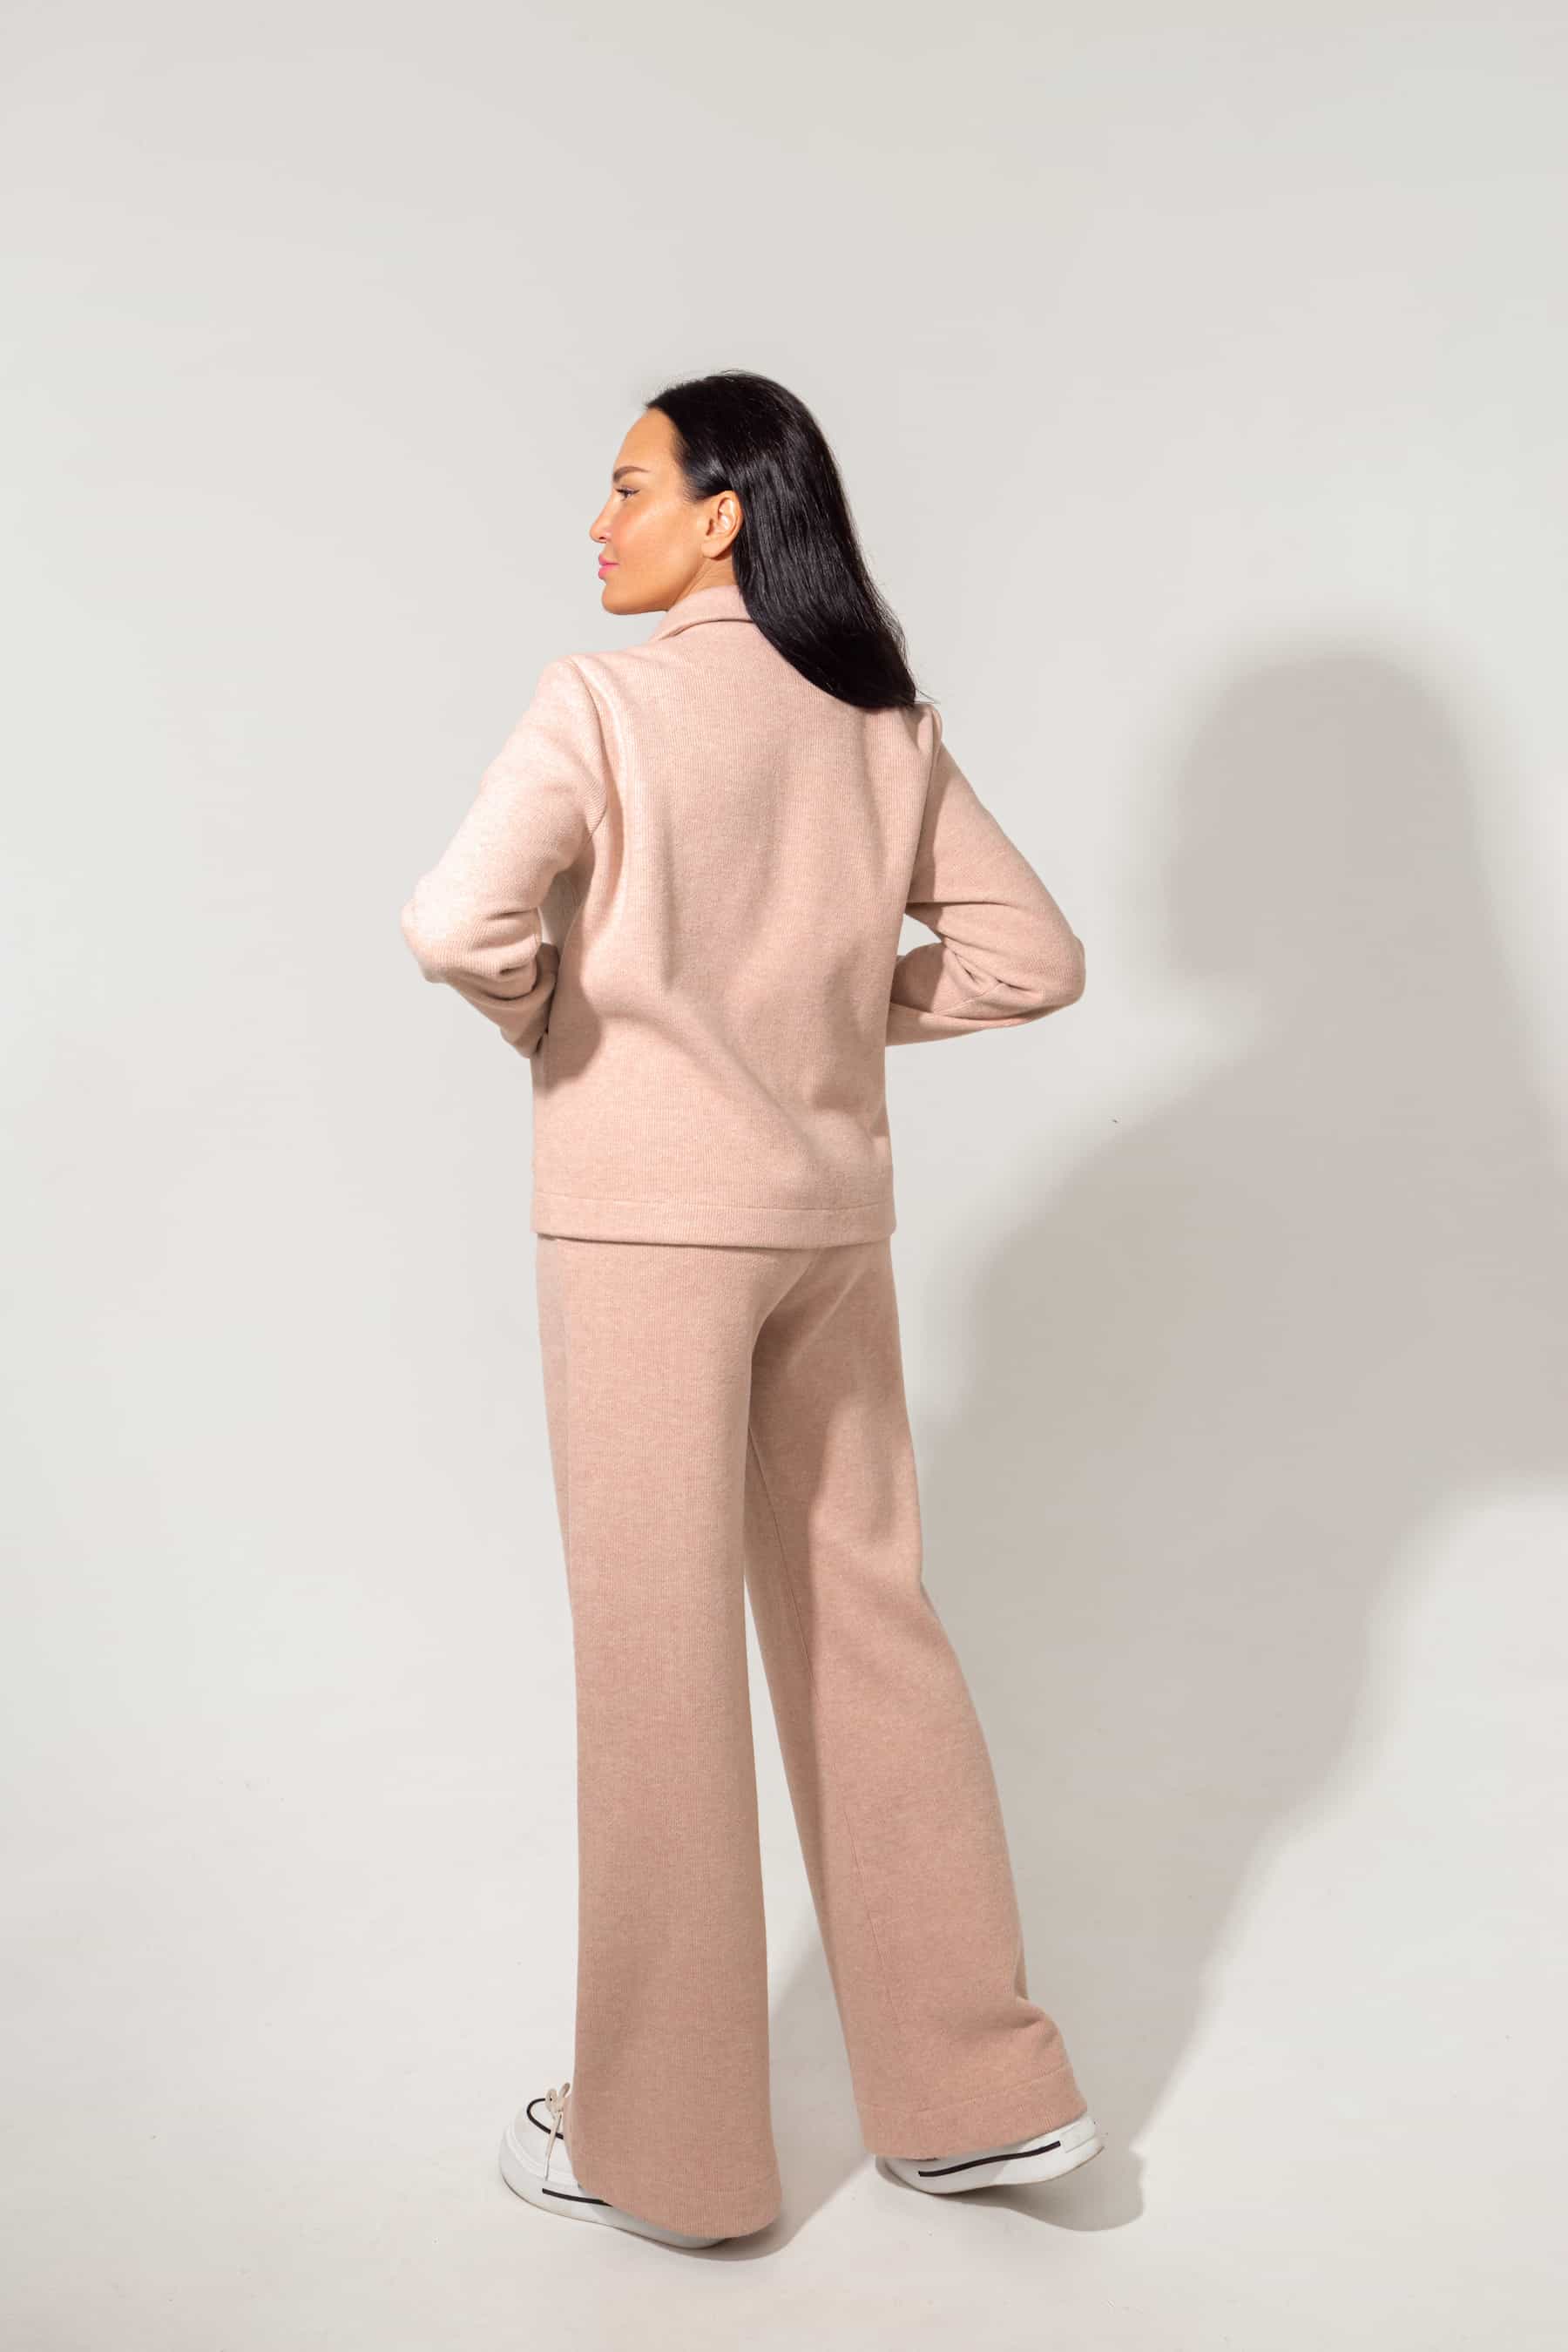 Suit (cardigan with pockets and trousers) in powder color